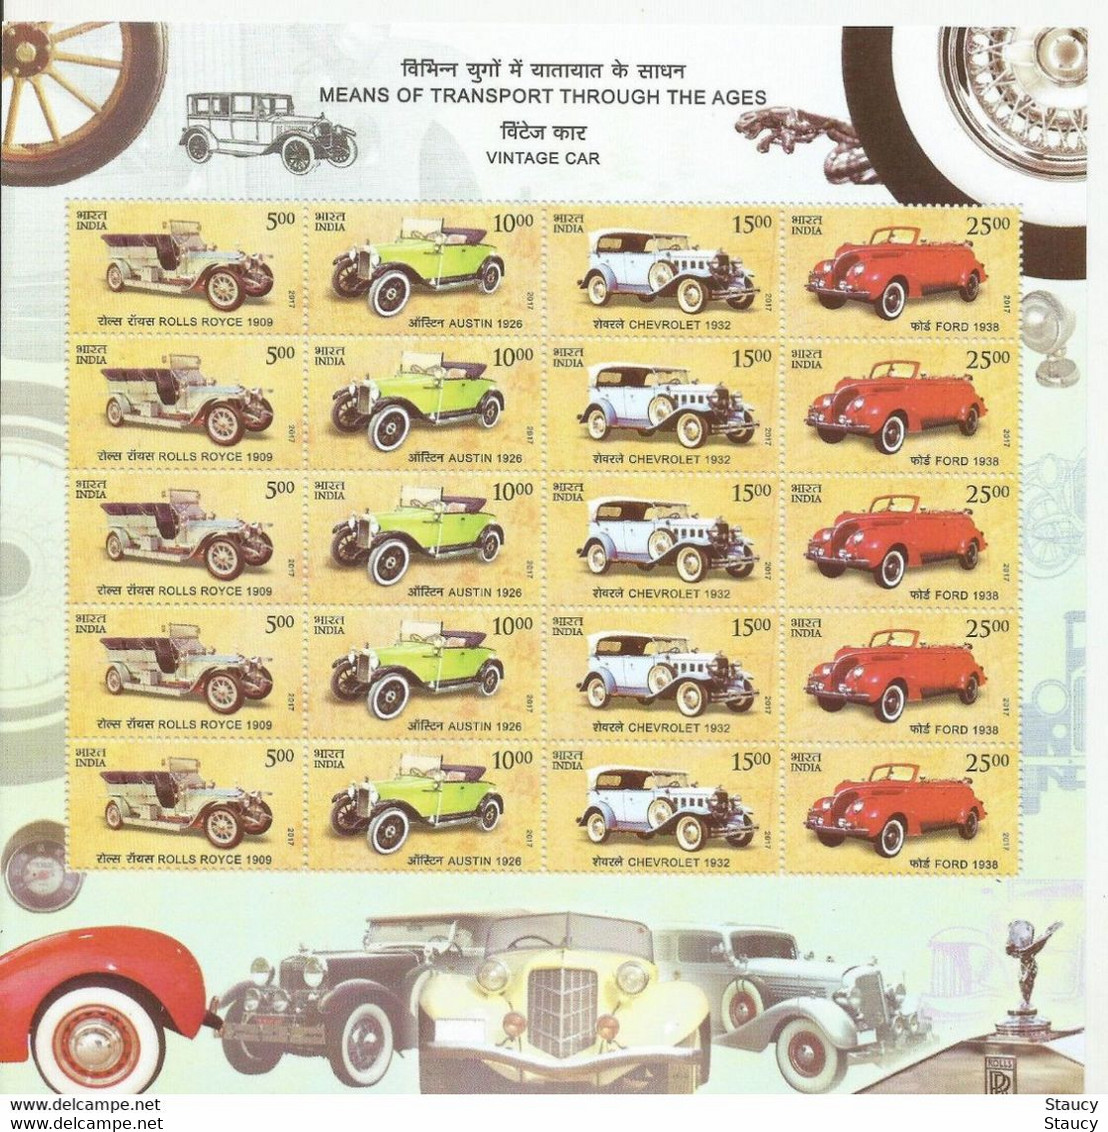 India 2017 Means Of Transport Through Ages Complete Set Of 6 Full Sheetlets (5 Different + 1 All Stamps Mix Sheet) MNH - Diligences